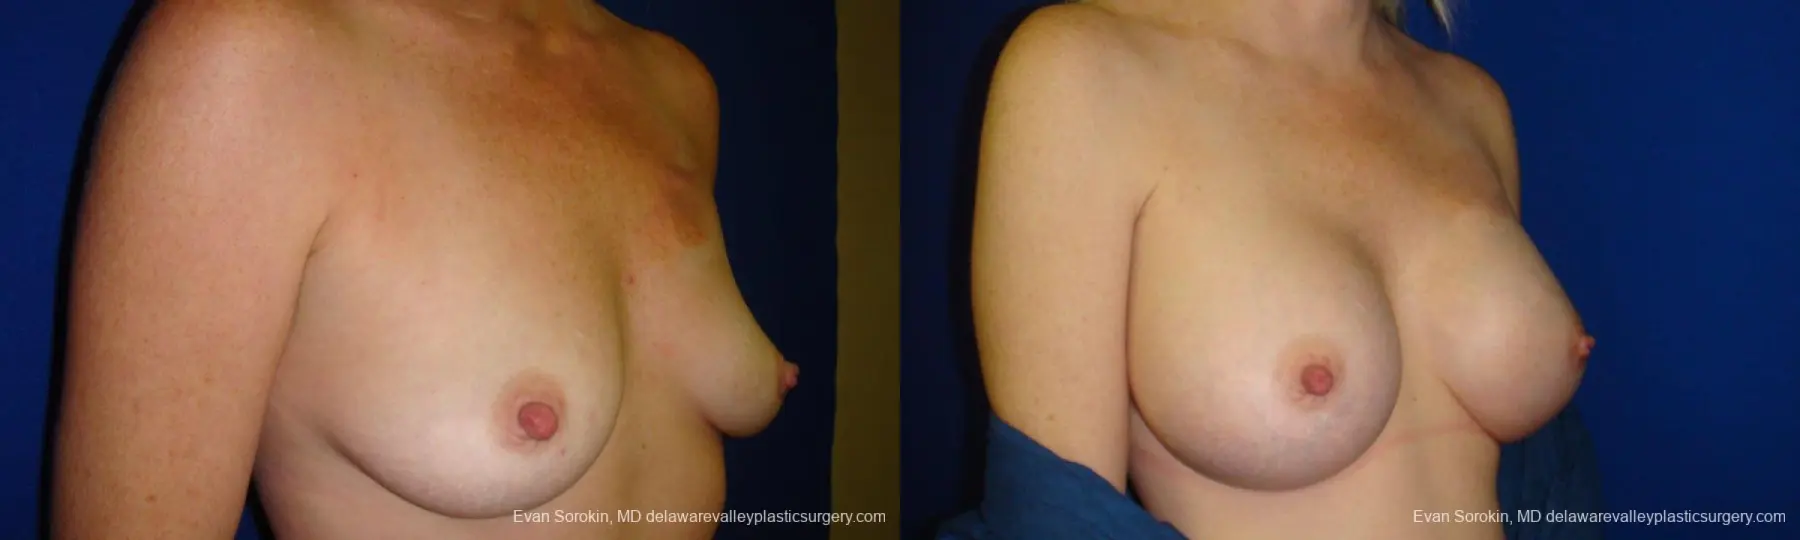 Philadelphia Breast Augmentation 9295 - Before and After 2